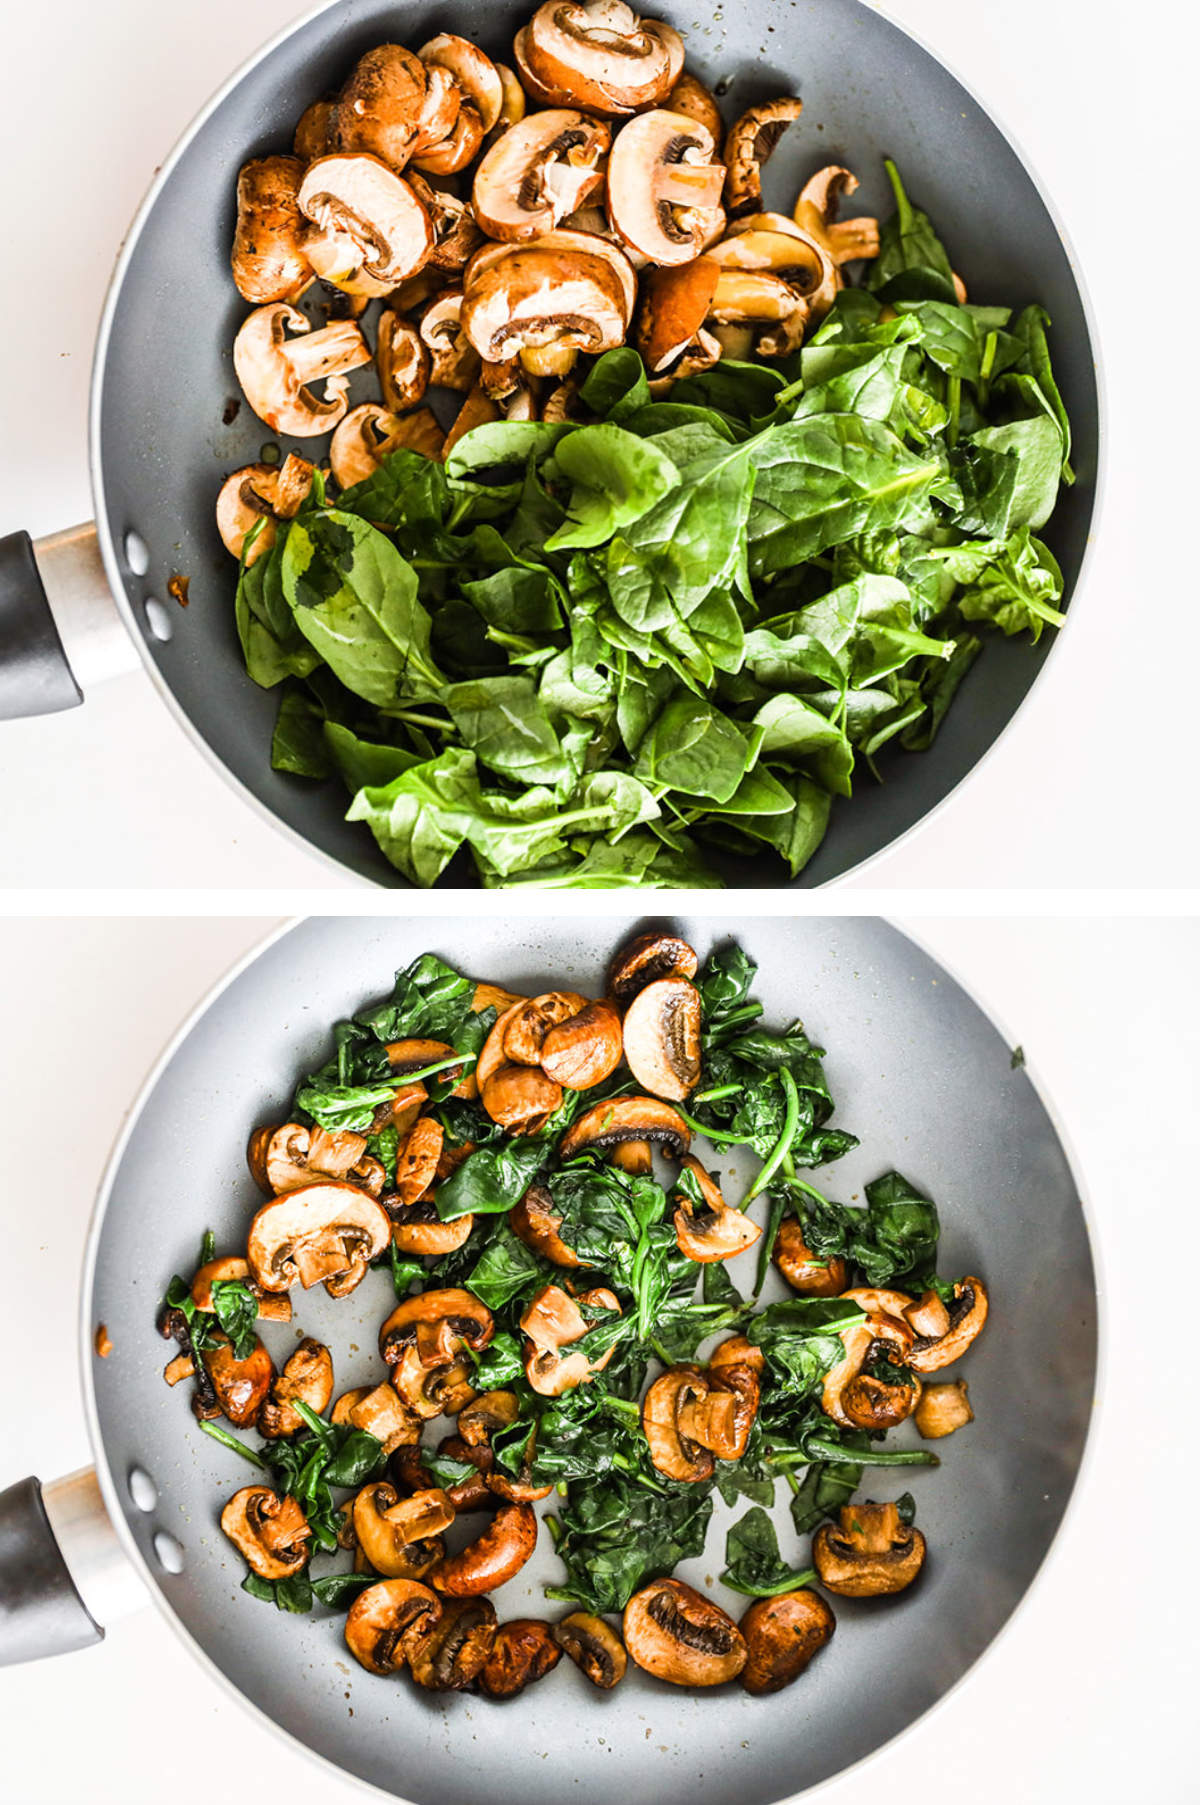 Two overhead images in one: 1. Spinach and mushrooms in a frying pan. 2. Spinach and mushrooms sauteed in frying pan. 